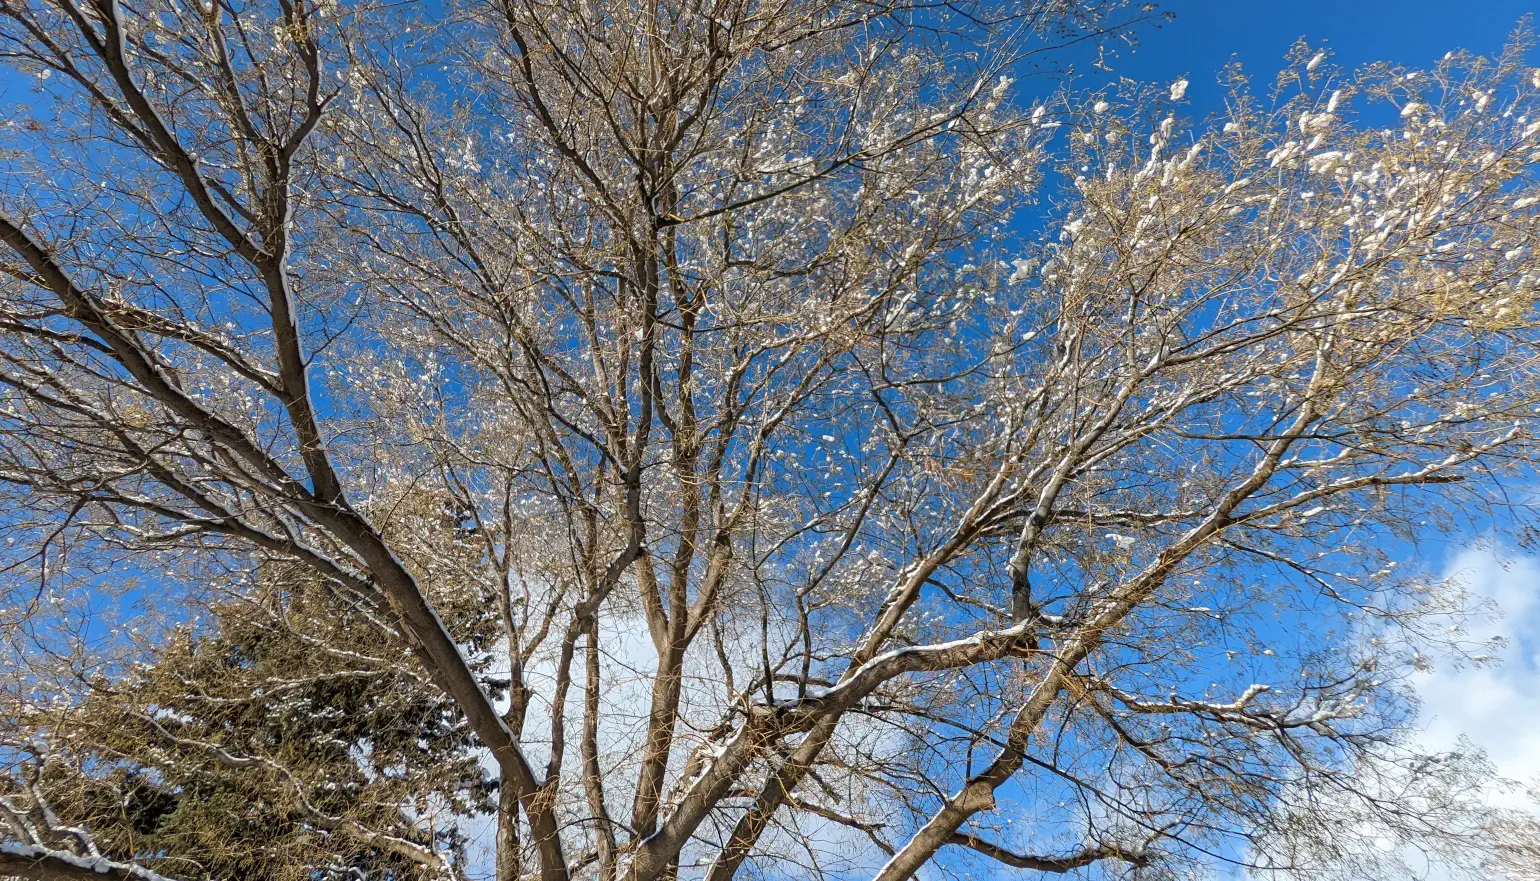 Trees covered with a small amount of snow against a blue sky and some white puffy clouds